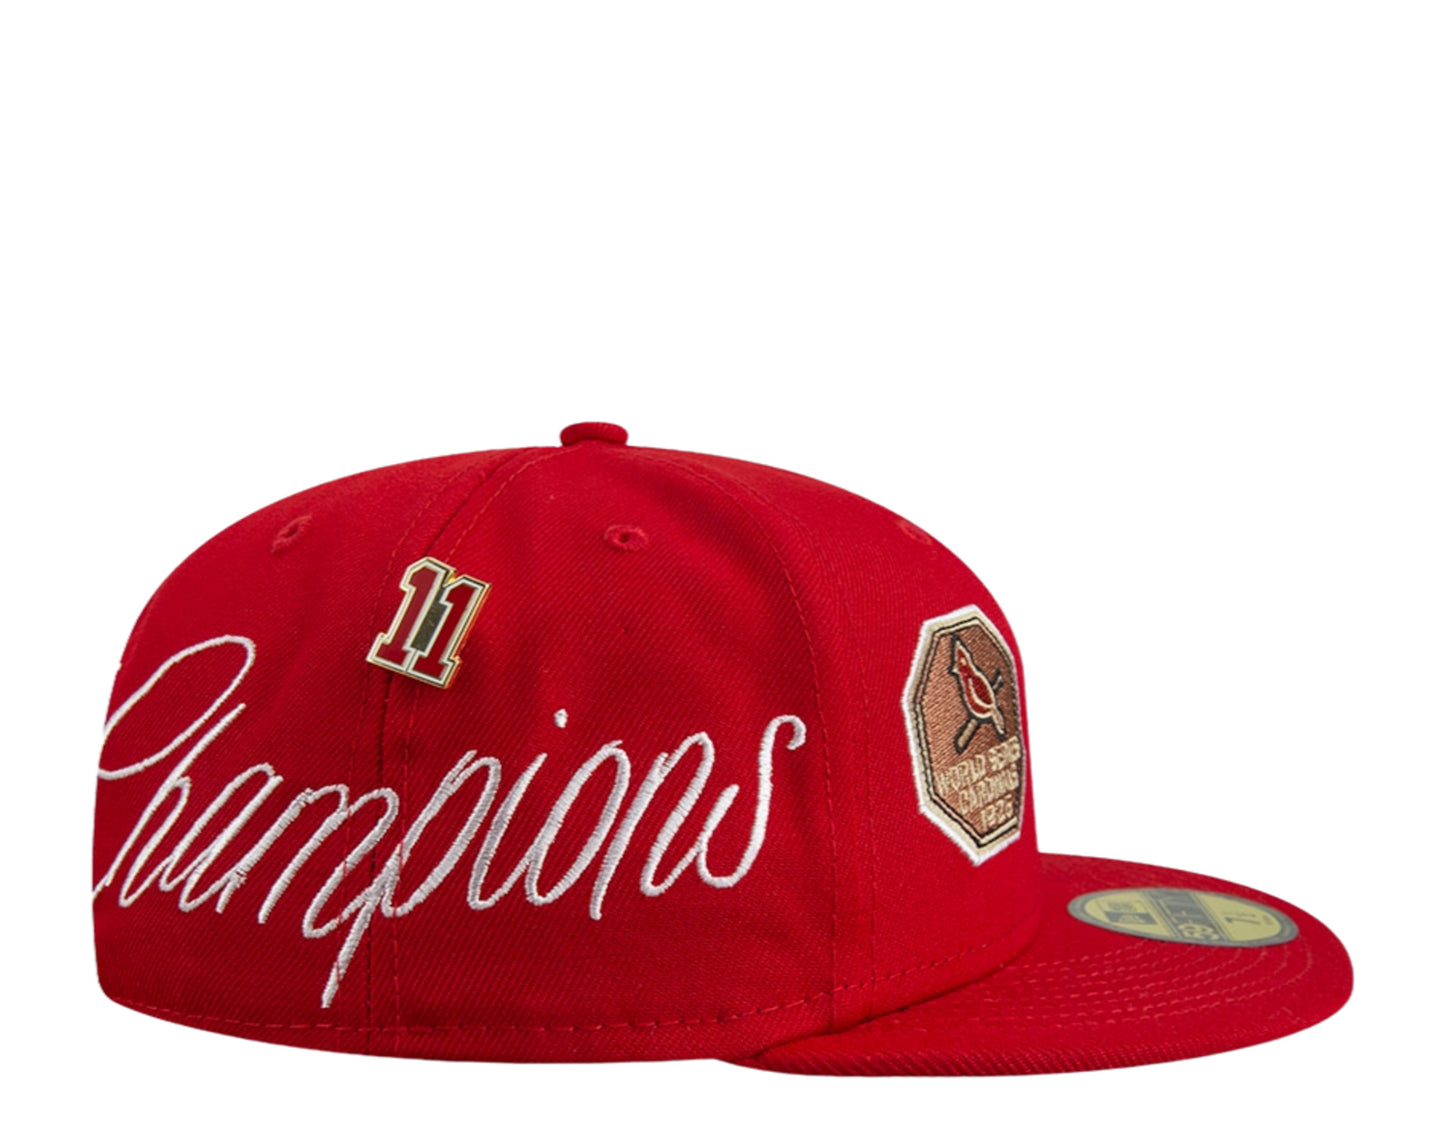 New Era 59Fifty MLB St. Louis Cardinals Historic Champs Fitted Hat